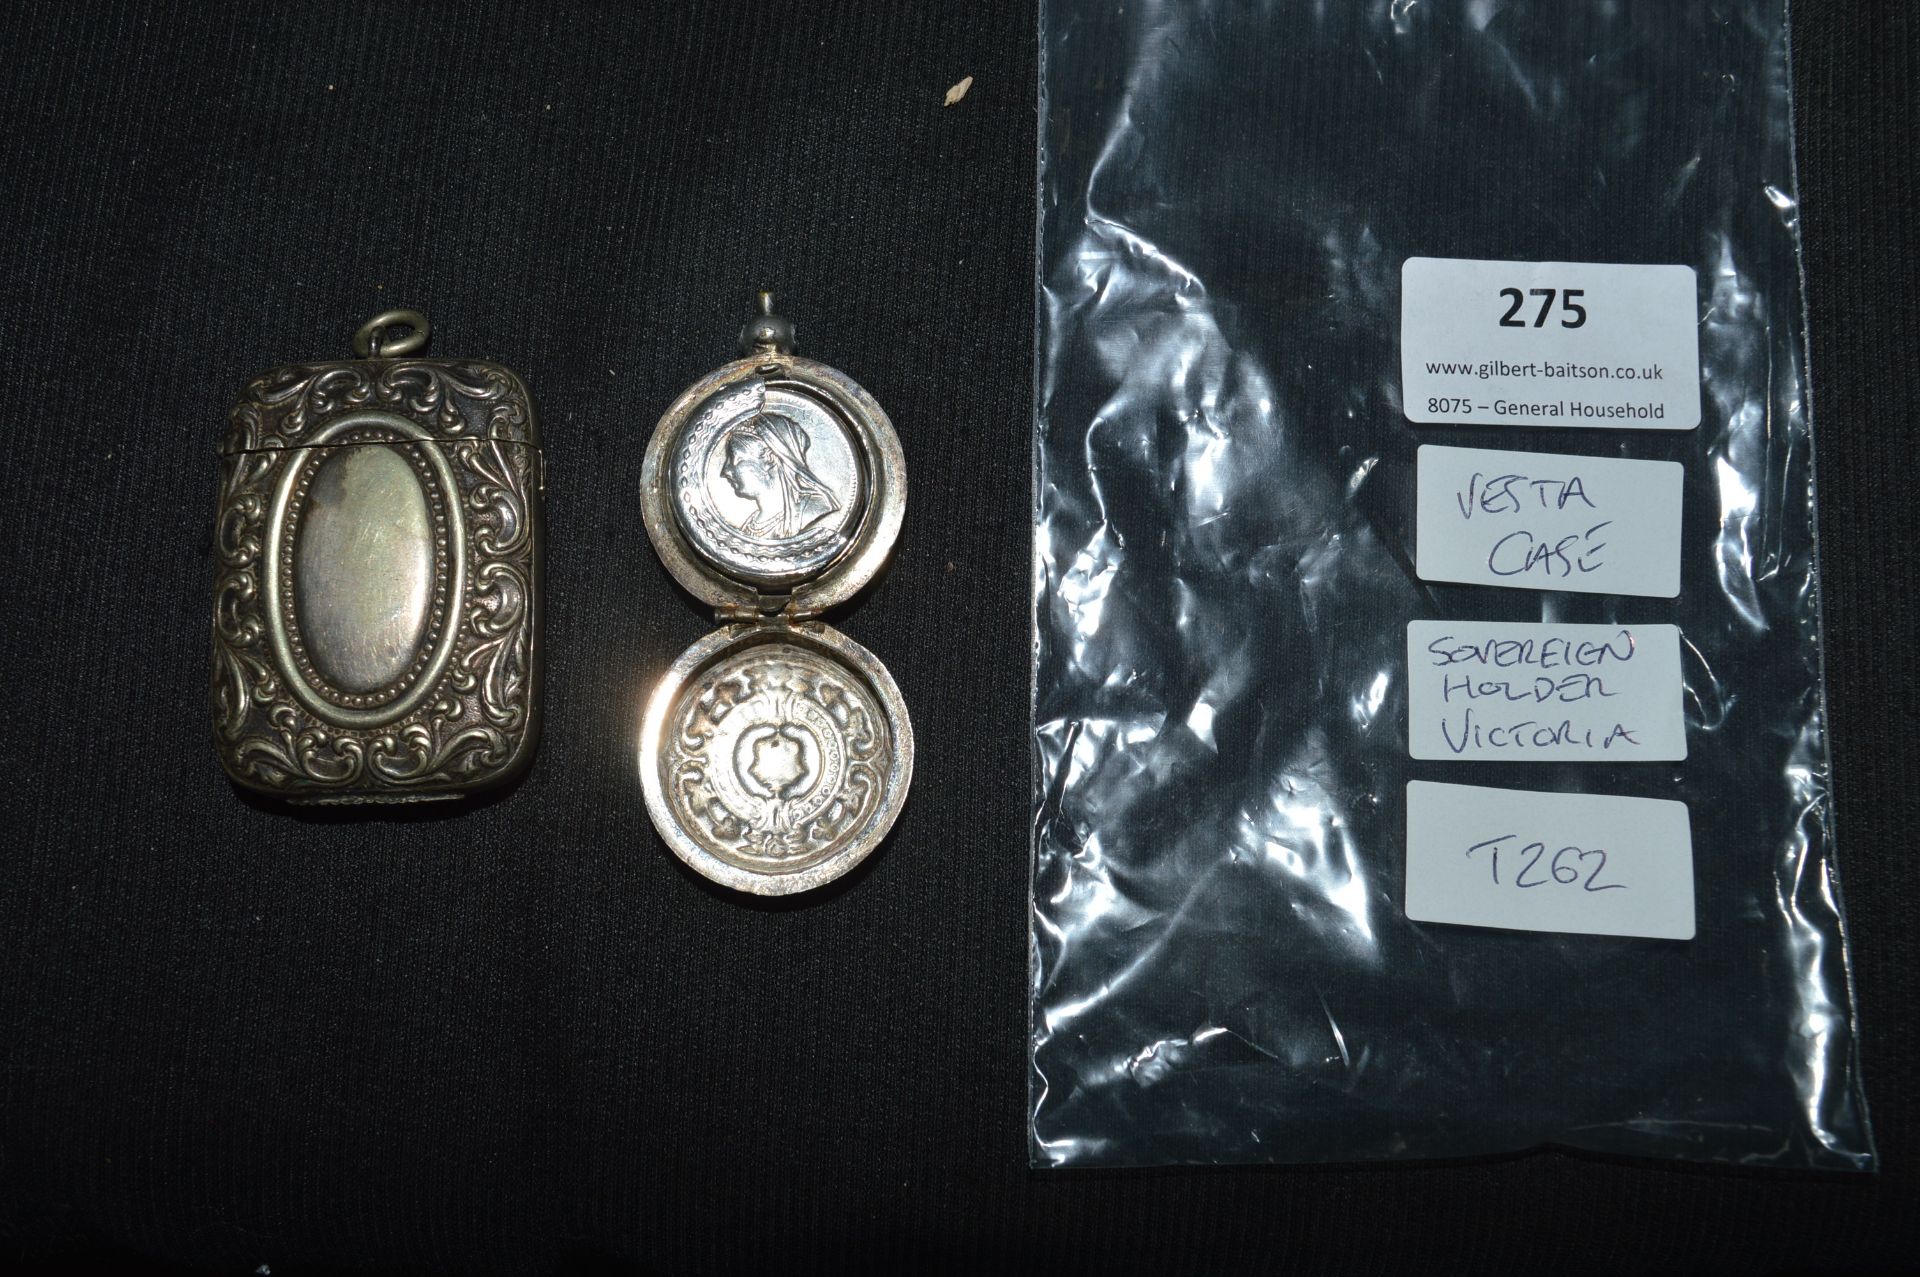 Plated Vesta Case and Queen Victoria Sovereign Hol